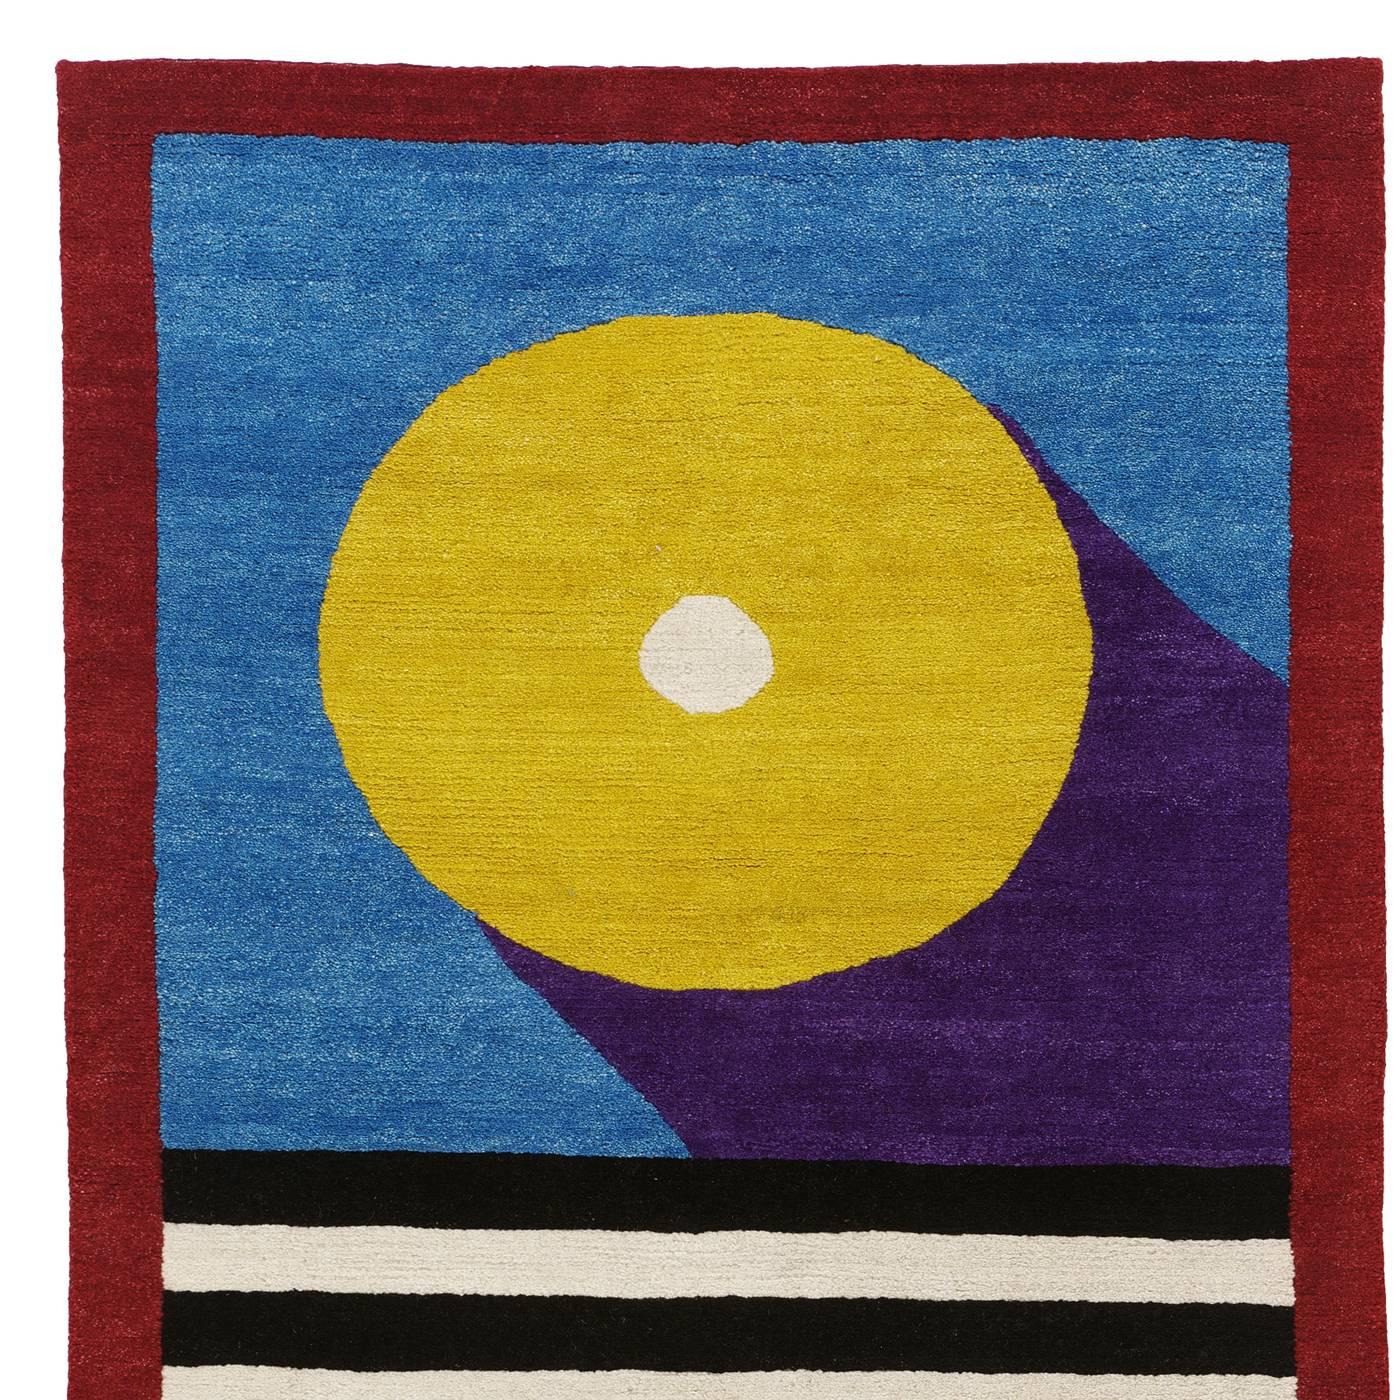 This striking carpet features bold patterns and bright, contrasting hues that make it perfect to decorate a contemporary home, adding splashes of colors to the floor. Part of a 36-piece limited series based on a design by Nathalie Du Pasquier, who